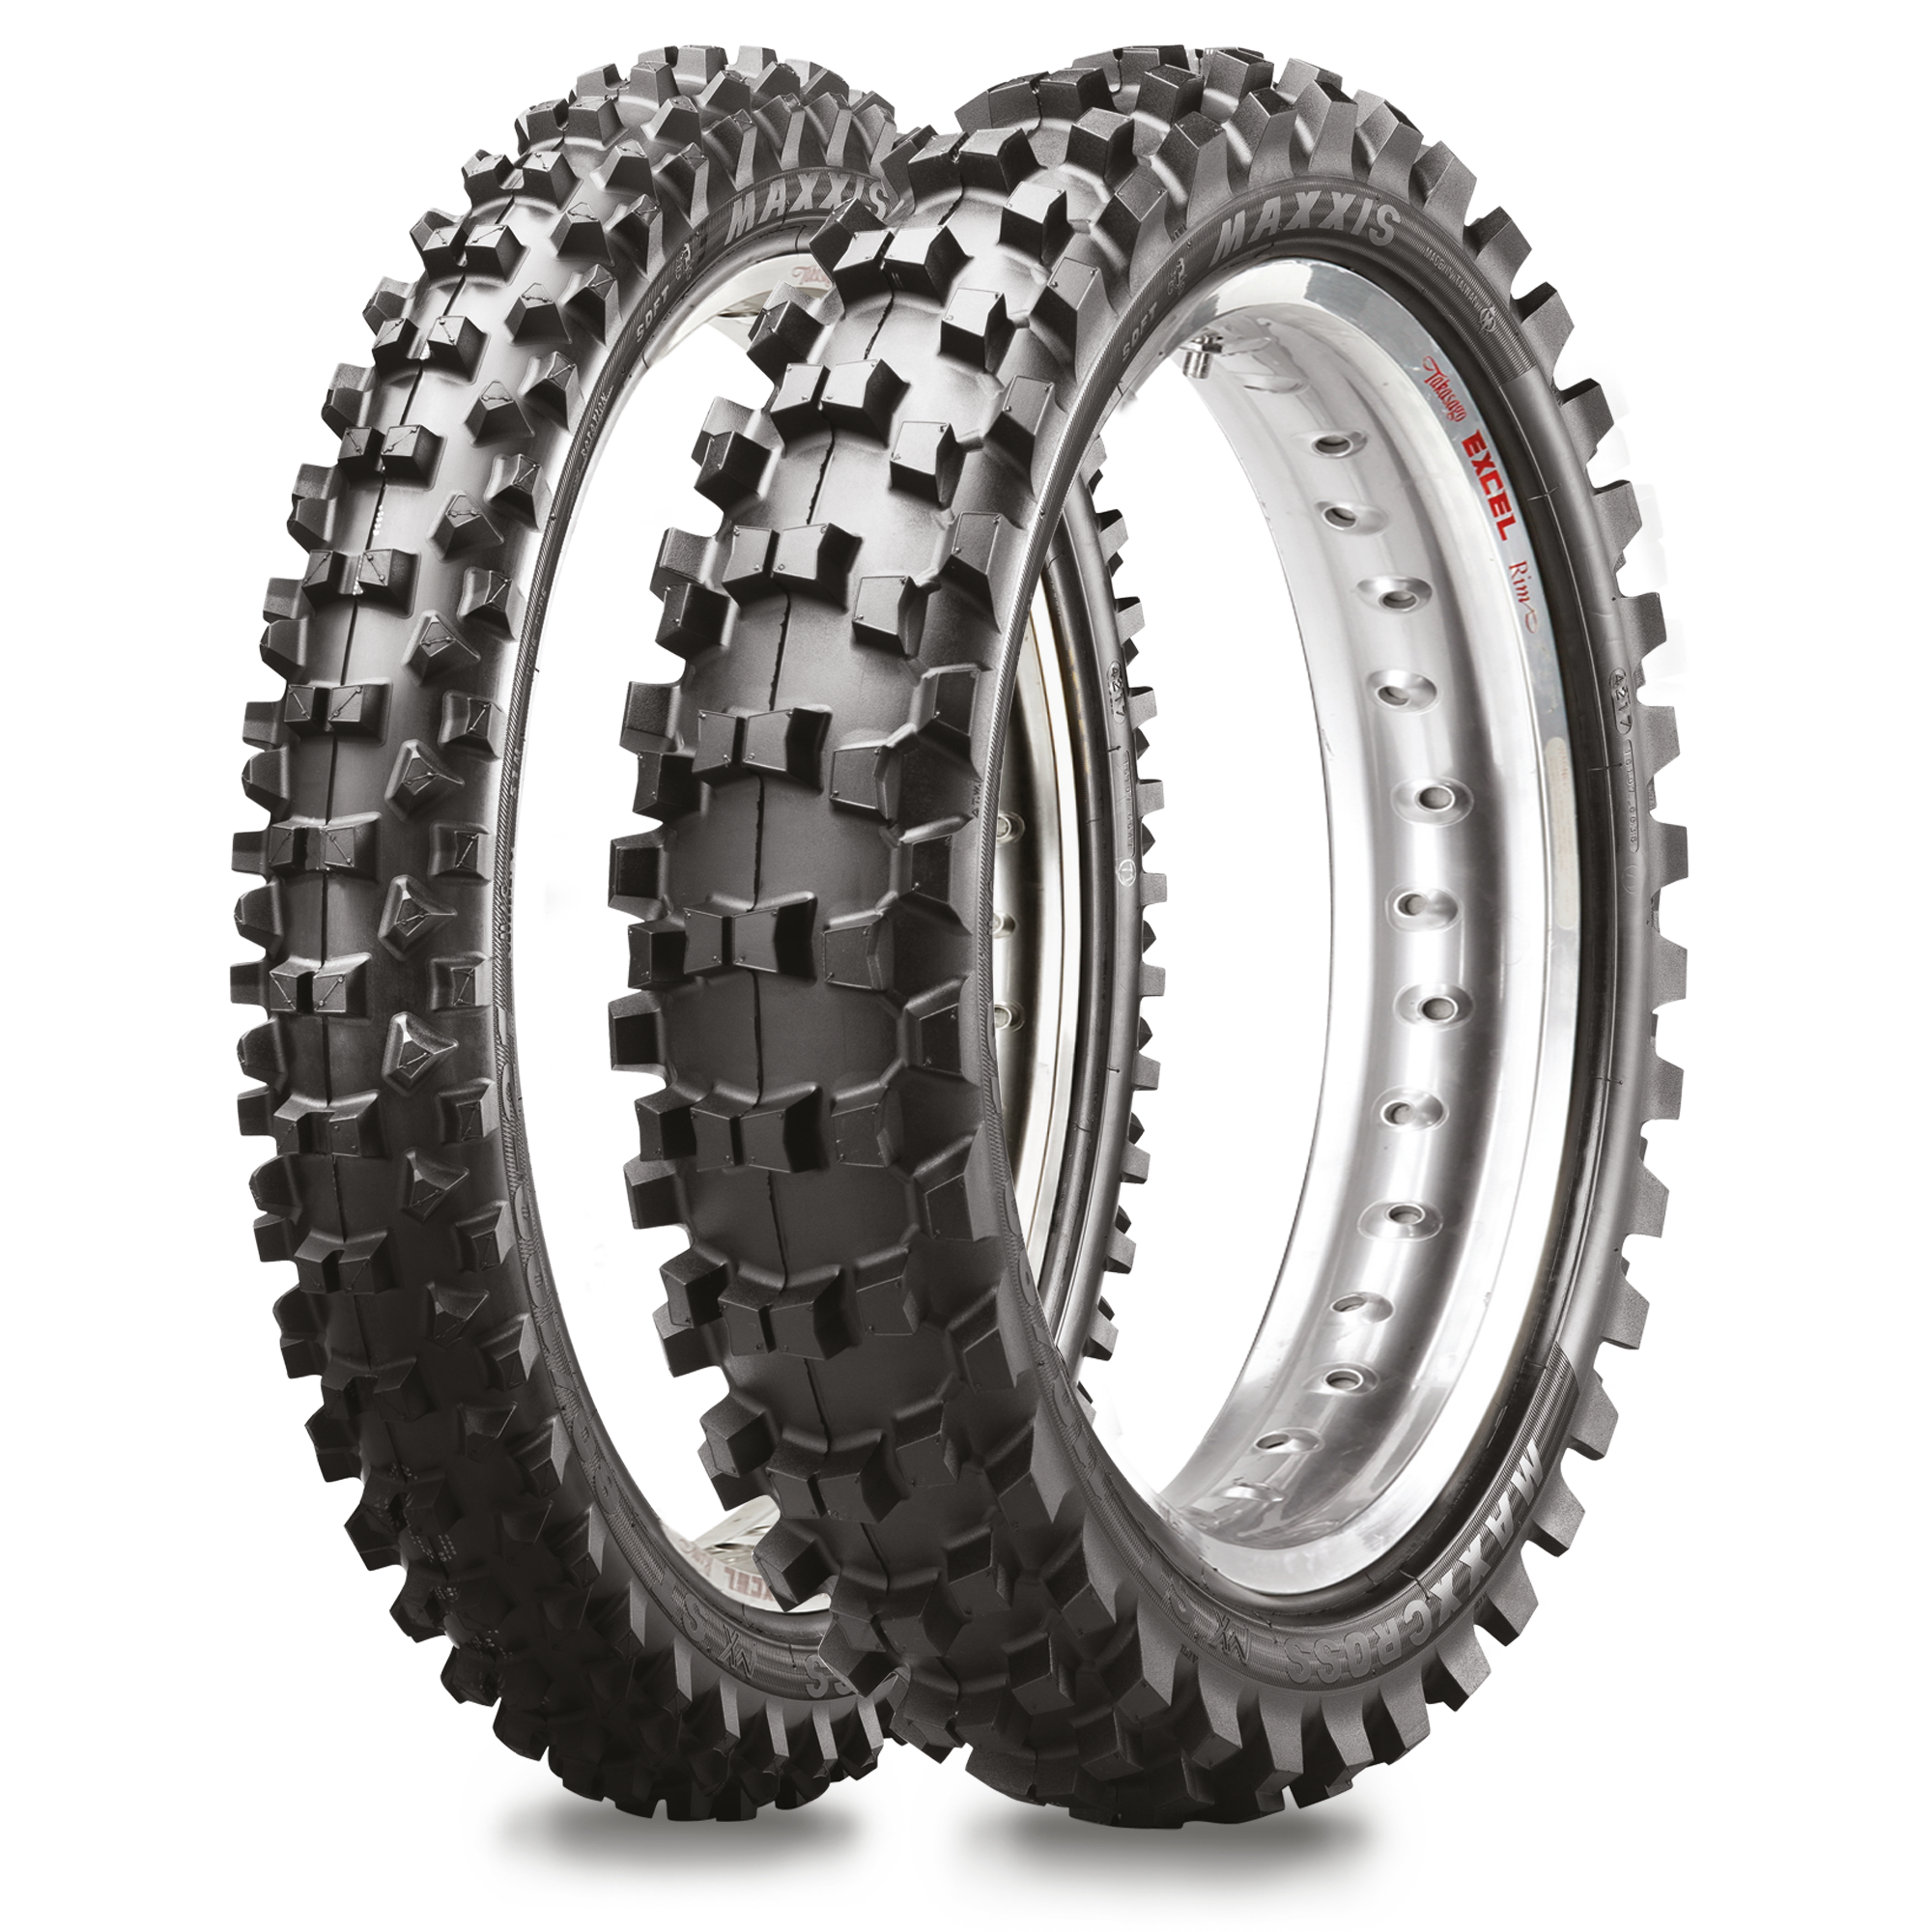 Maxxis M7304 Front 70/100-19 Maxxcross Intermediate Motorcycle Tire 